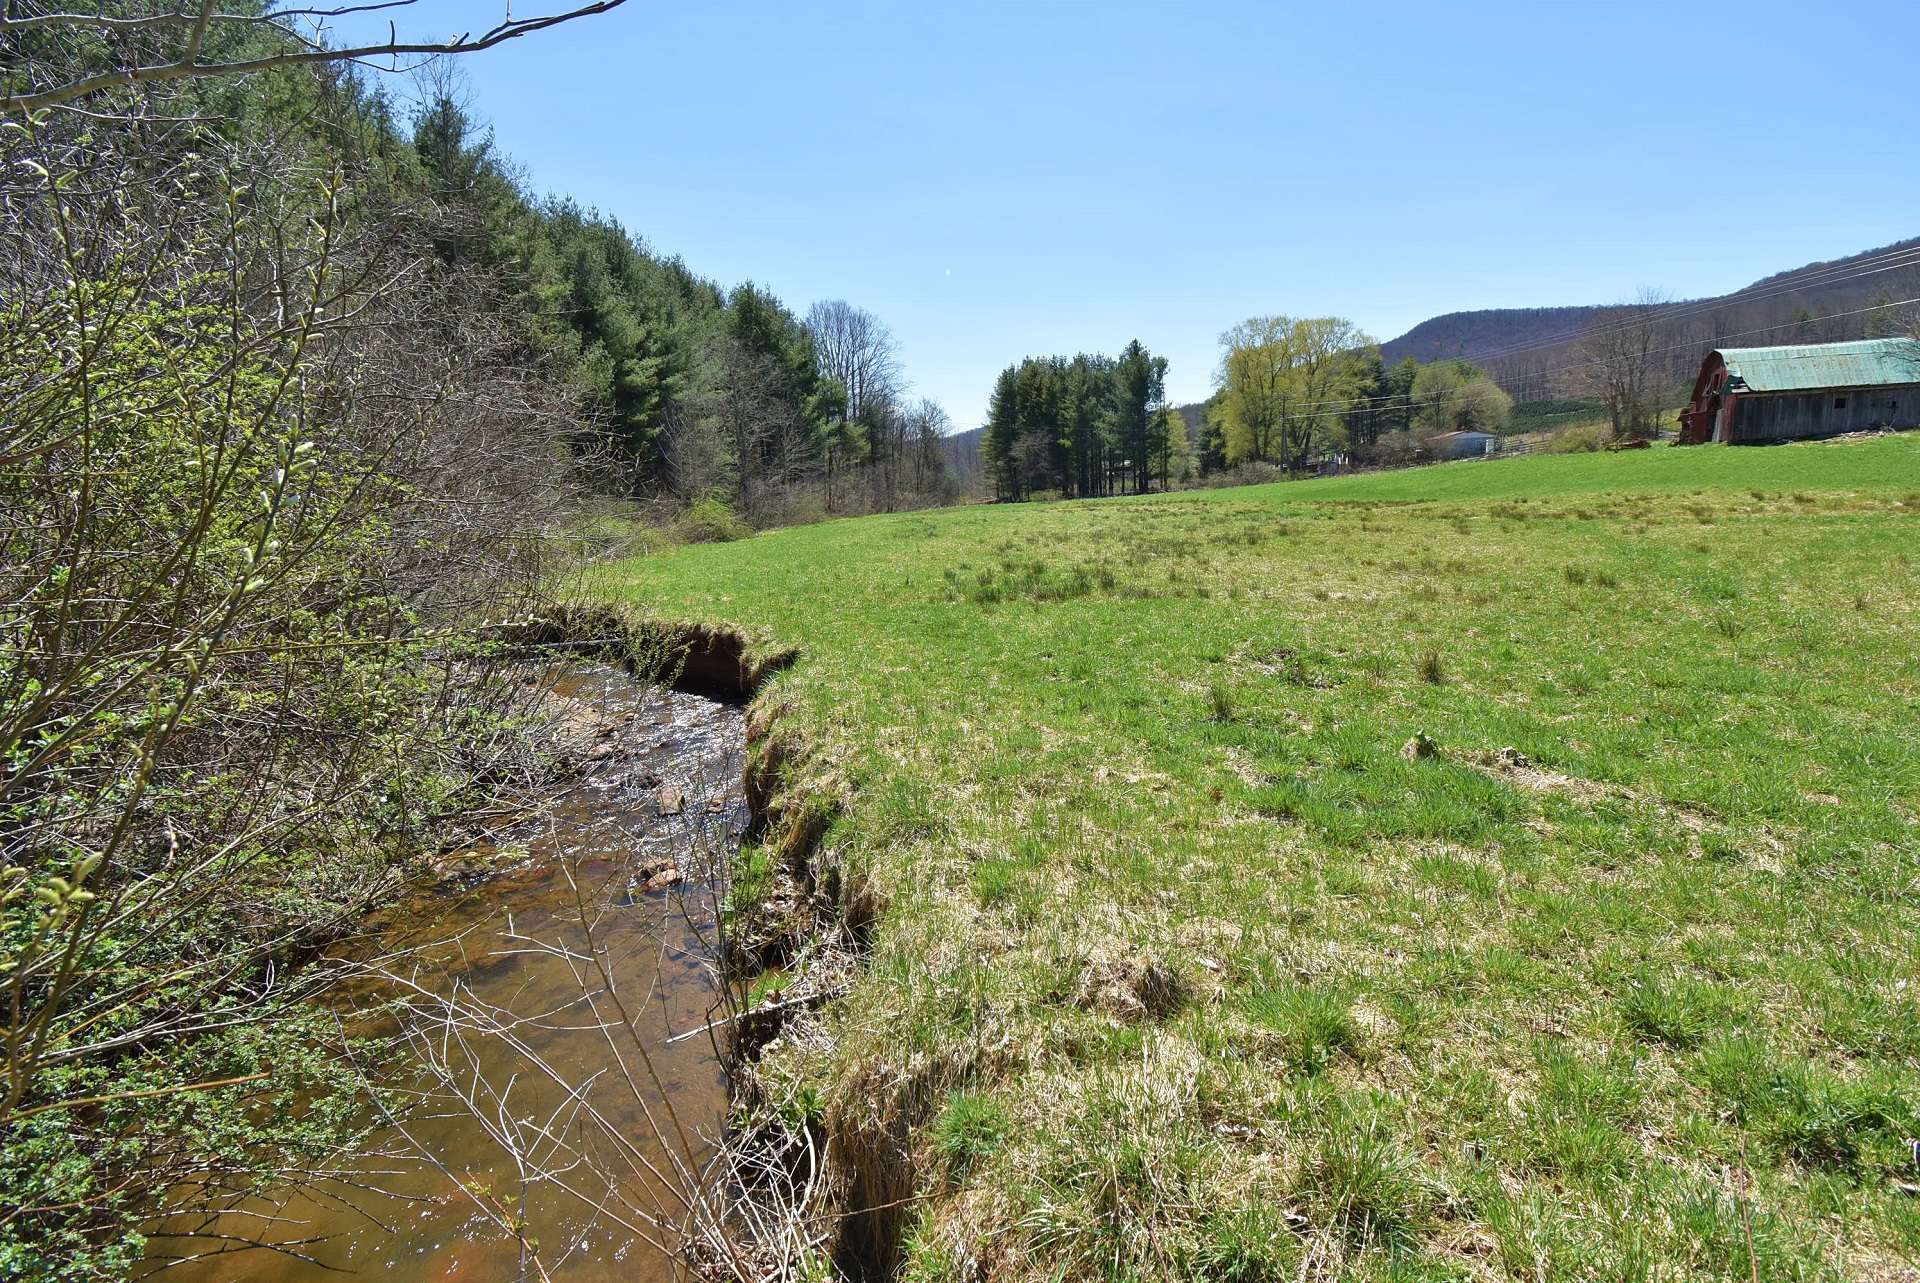 There is a small mountain creek that runs along side the pastures at the entrance.